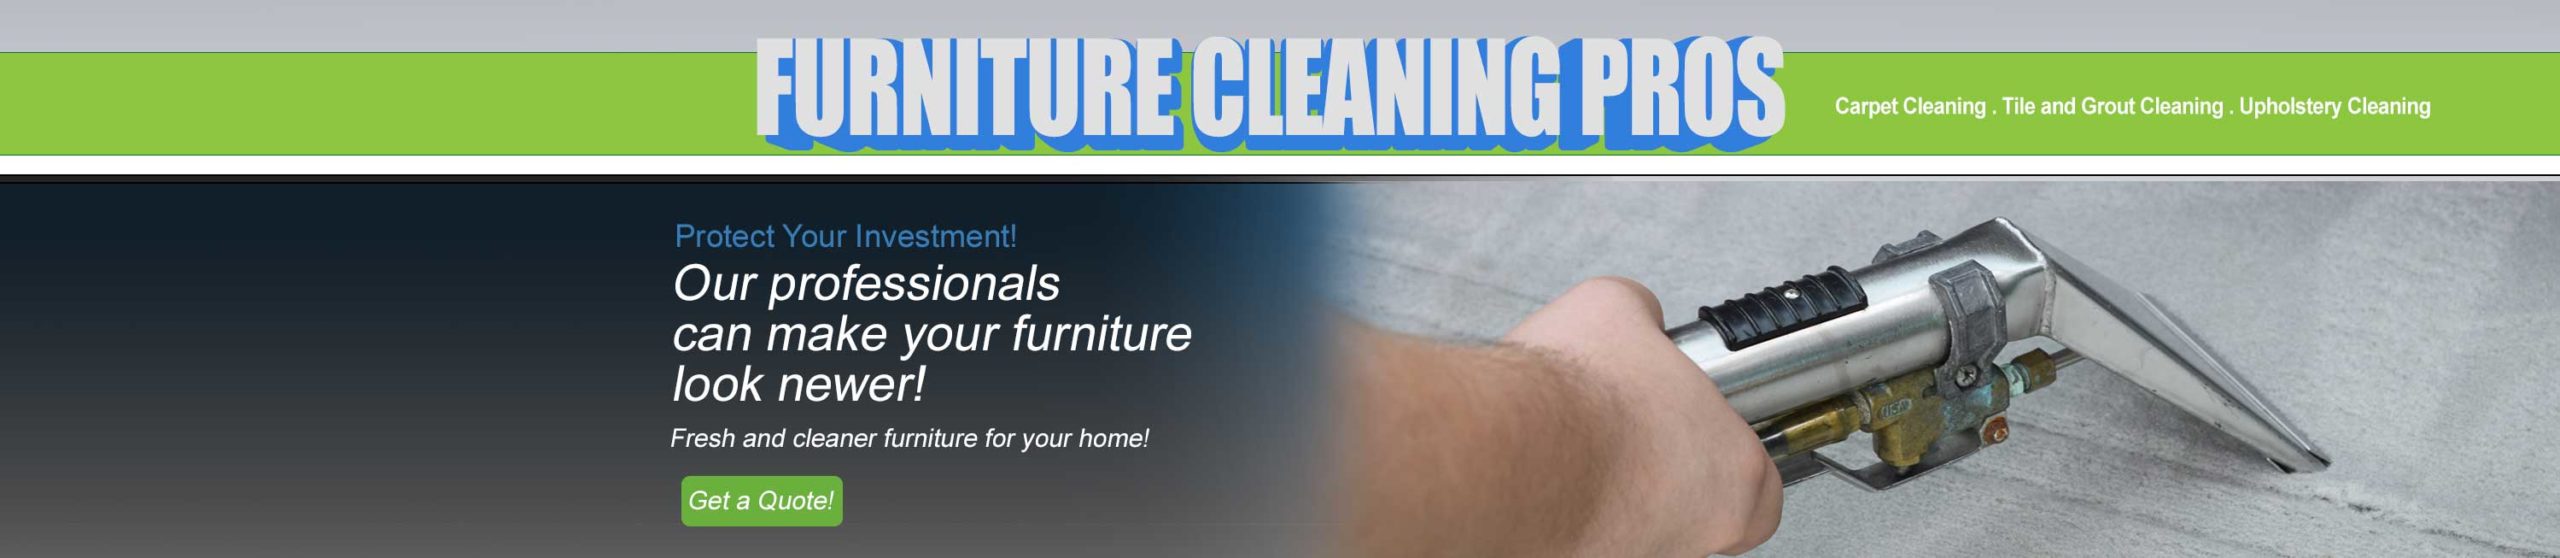 Furniture and upholstery cleaning in Fountain Hills AZ